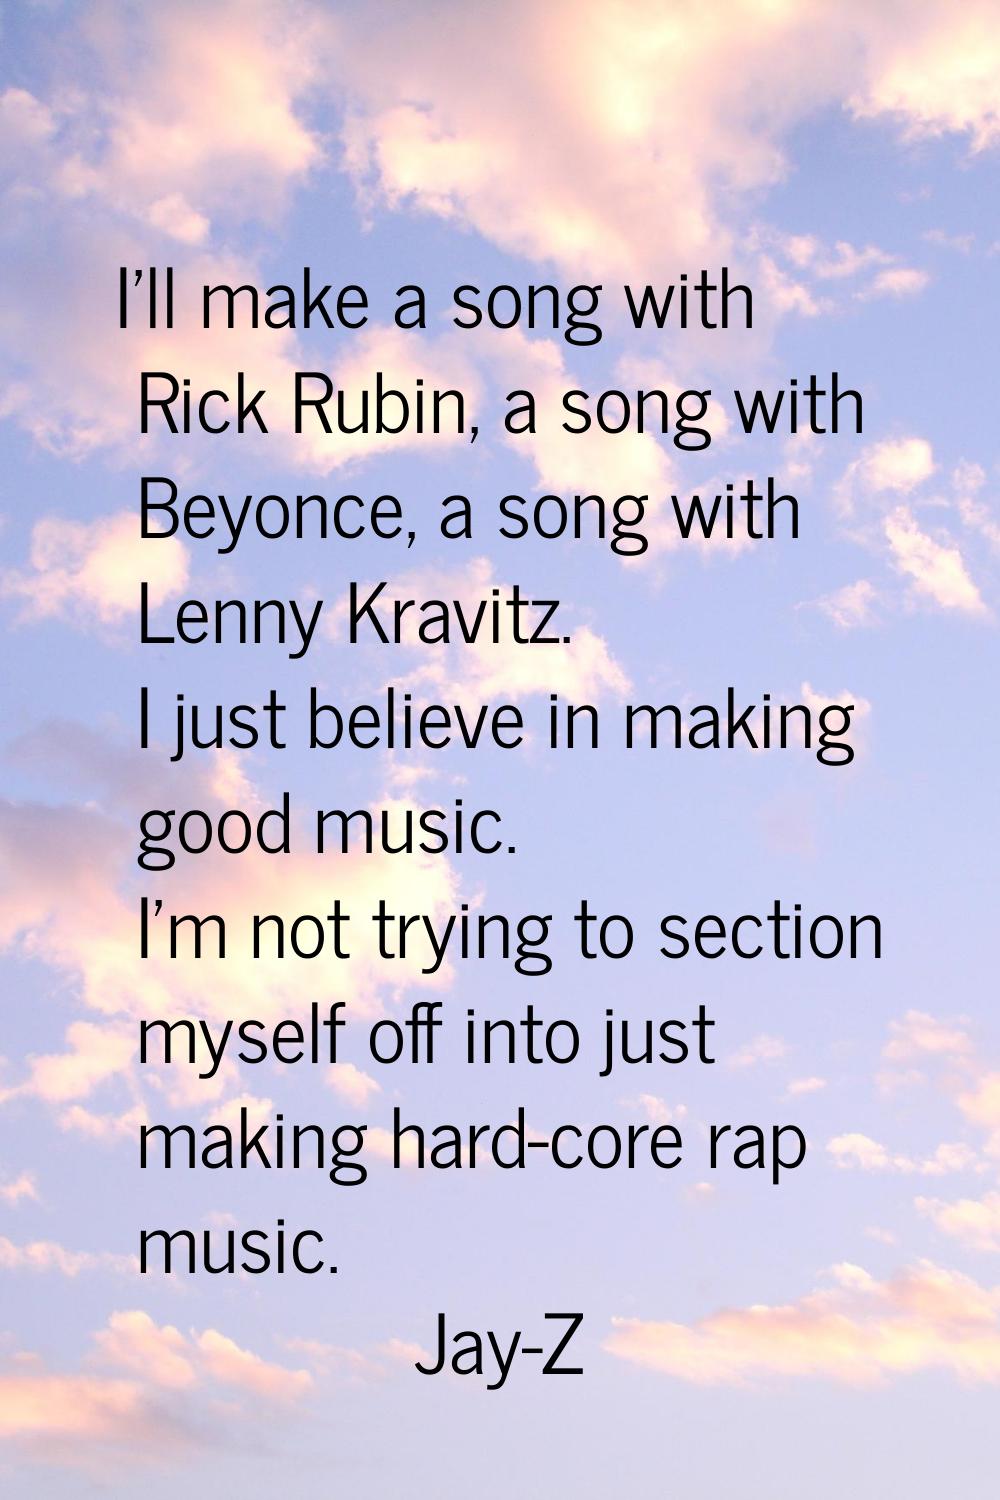 I'll make a song with Rick Rubin, a song with Beyonce, a song with Lenny Kravitz. I just believe in